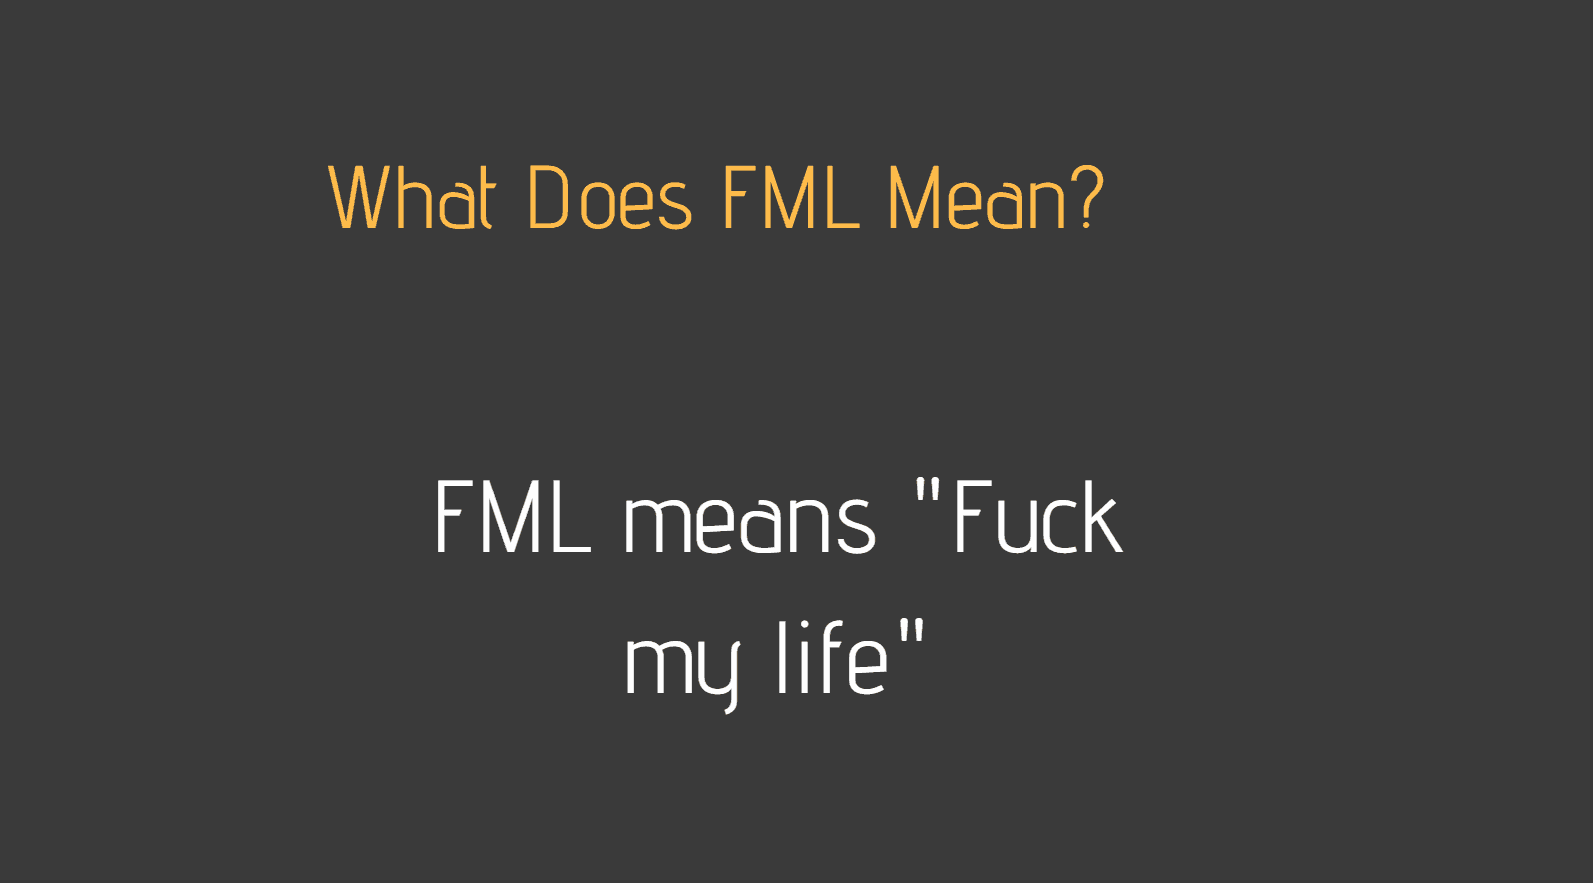 Fml meaning in chat